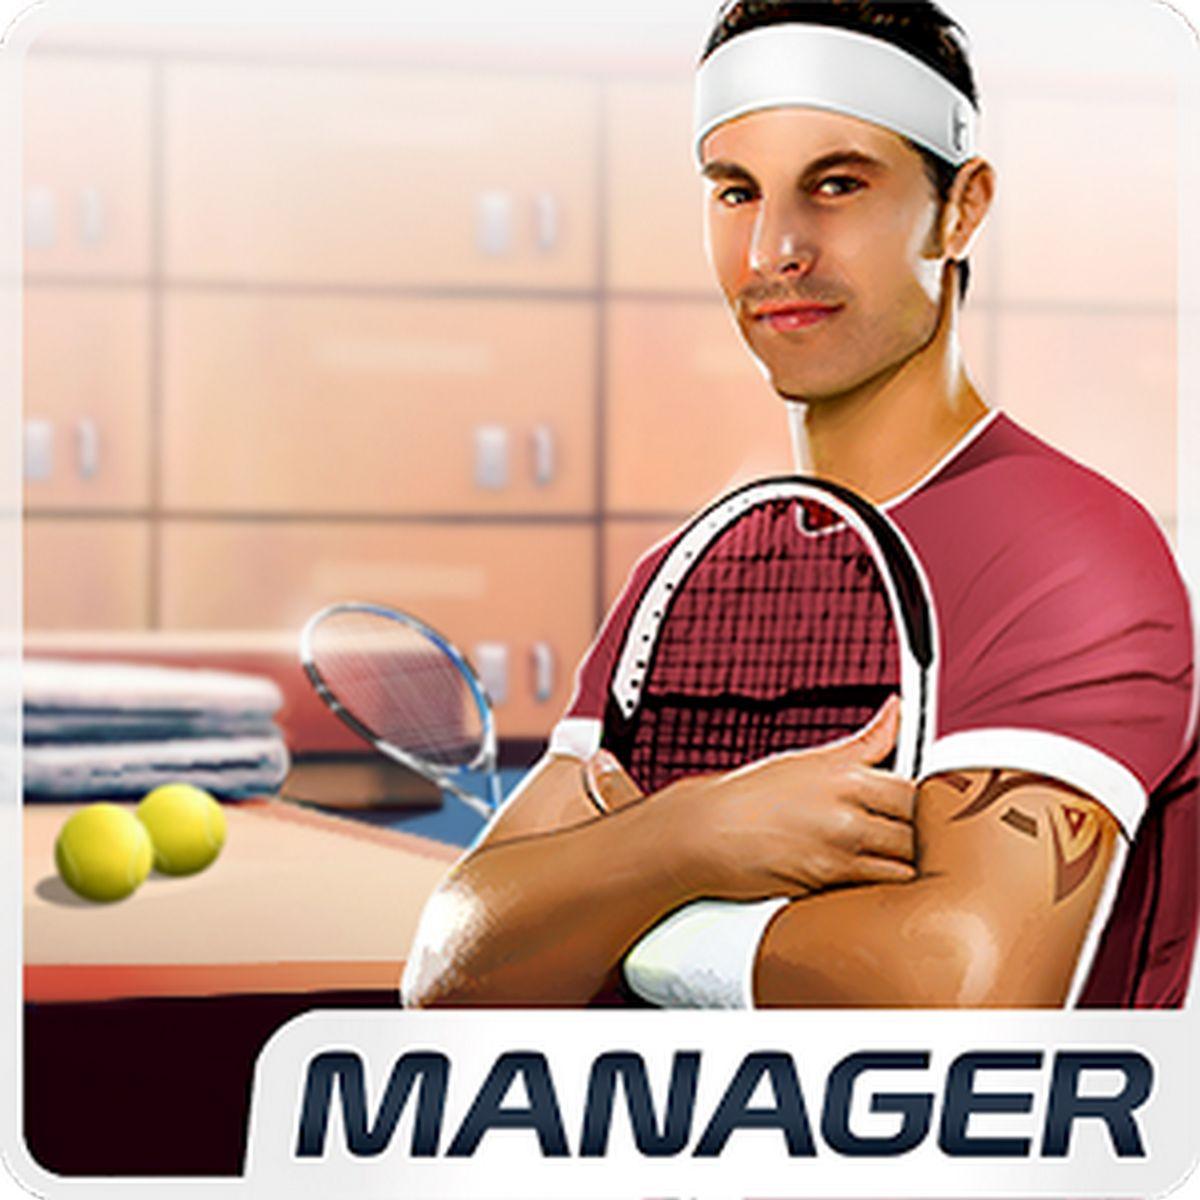 TOP SEED Tennis Sports Management & Strategy Games APK MOD